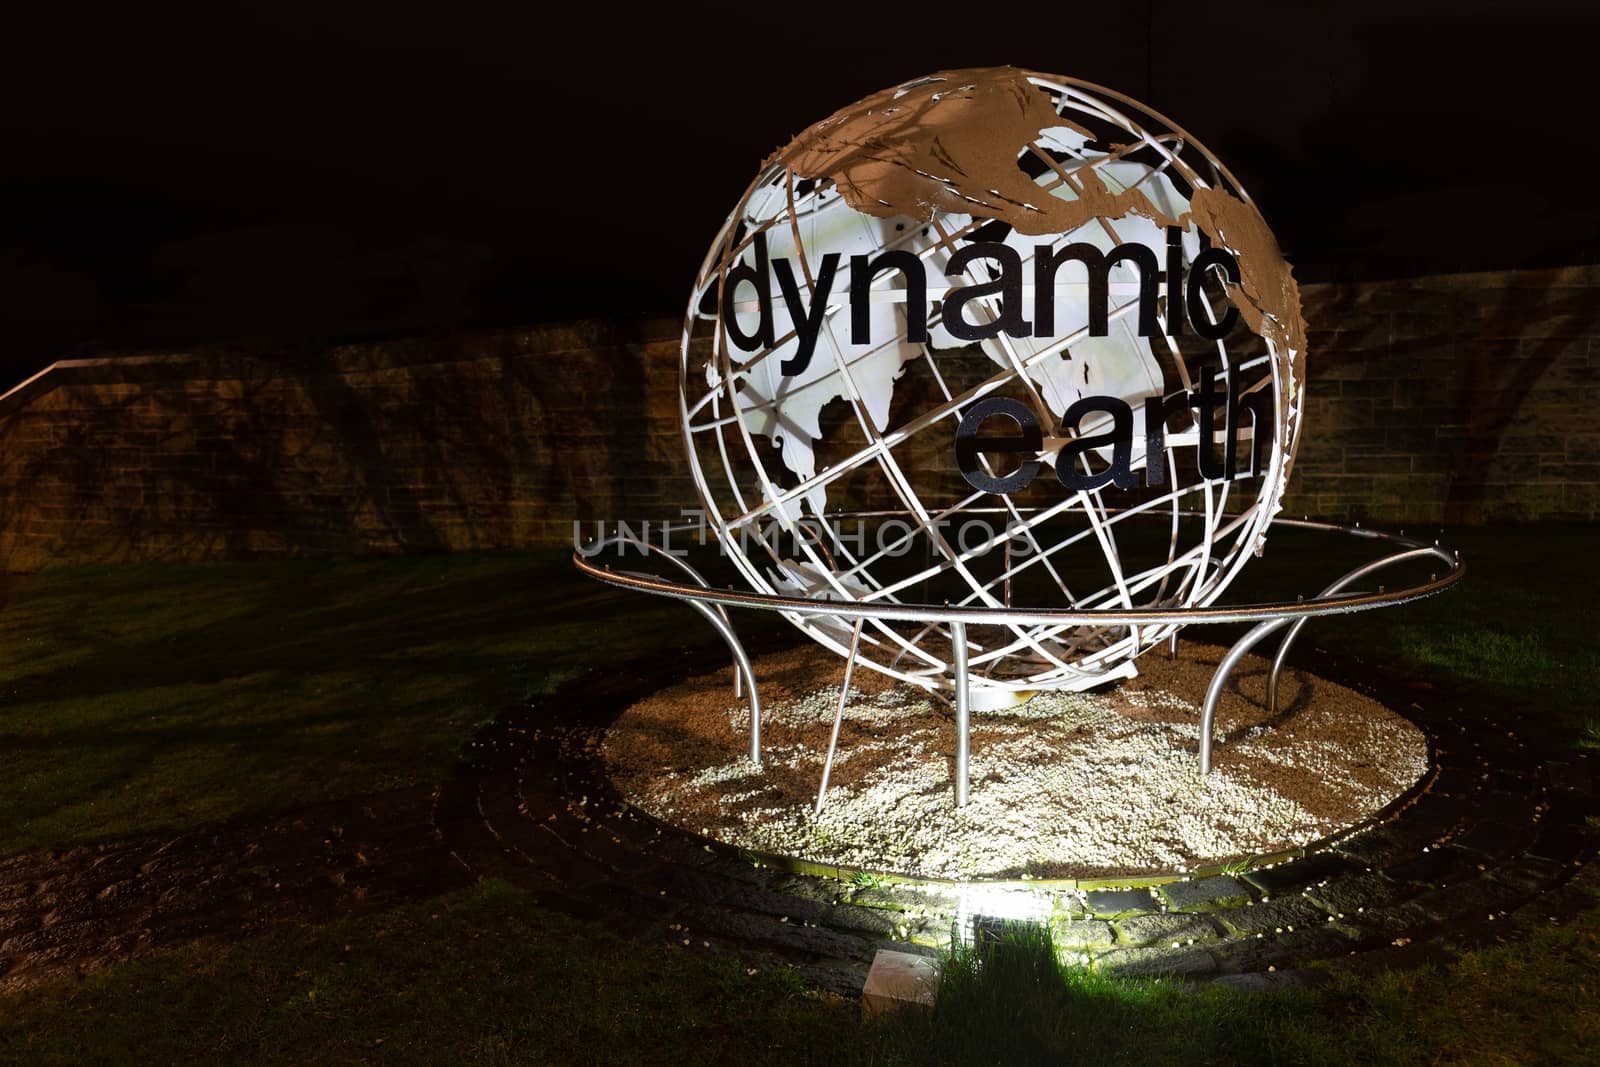 Globe at entrance of dynamic earth with black text and spotlights in Scotland